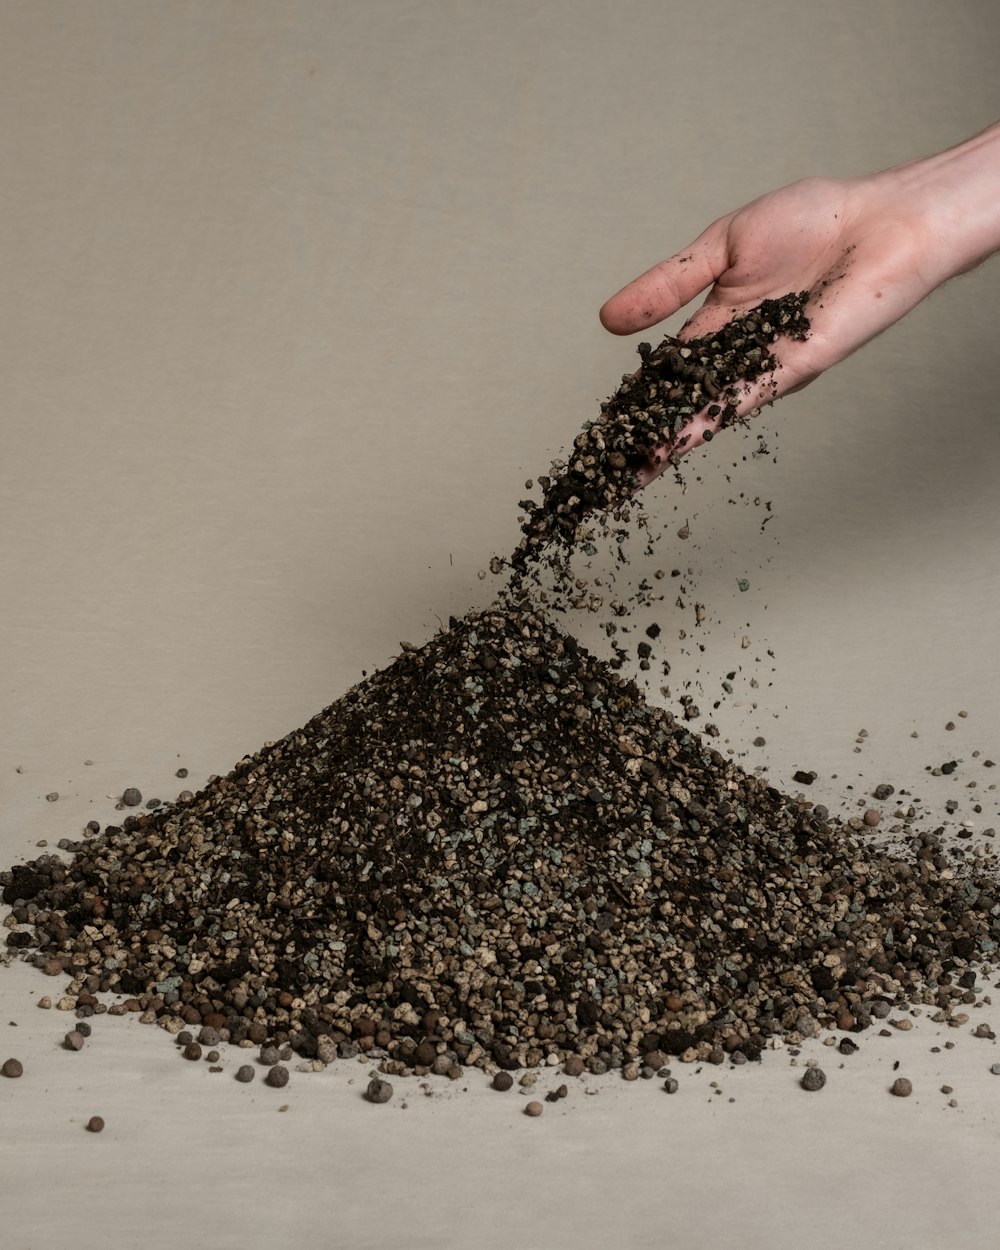 a pile of dirt in a person's hand